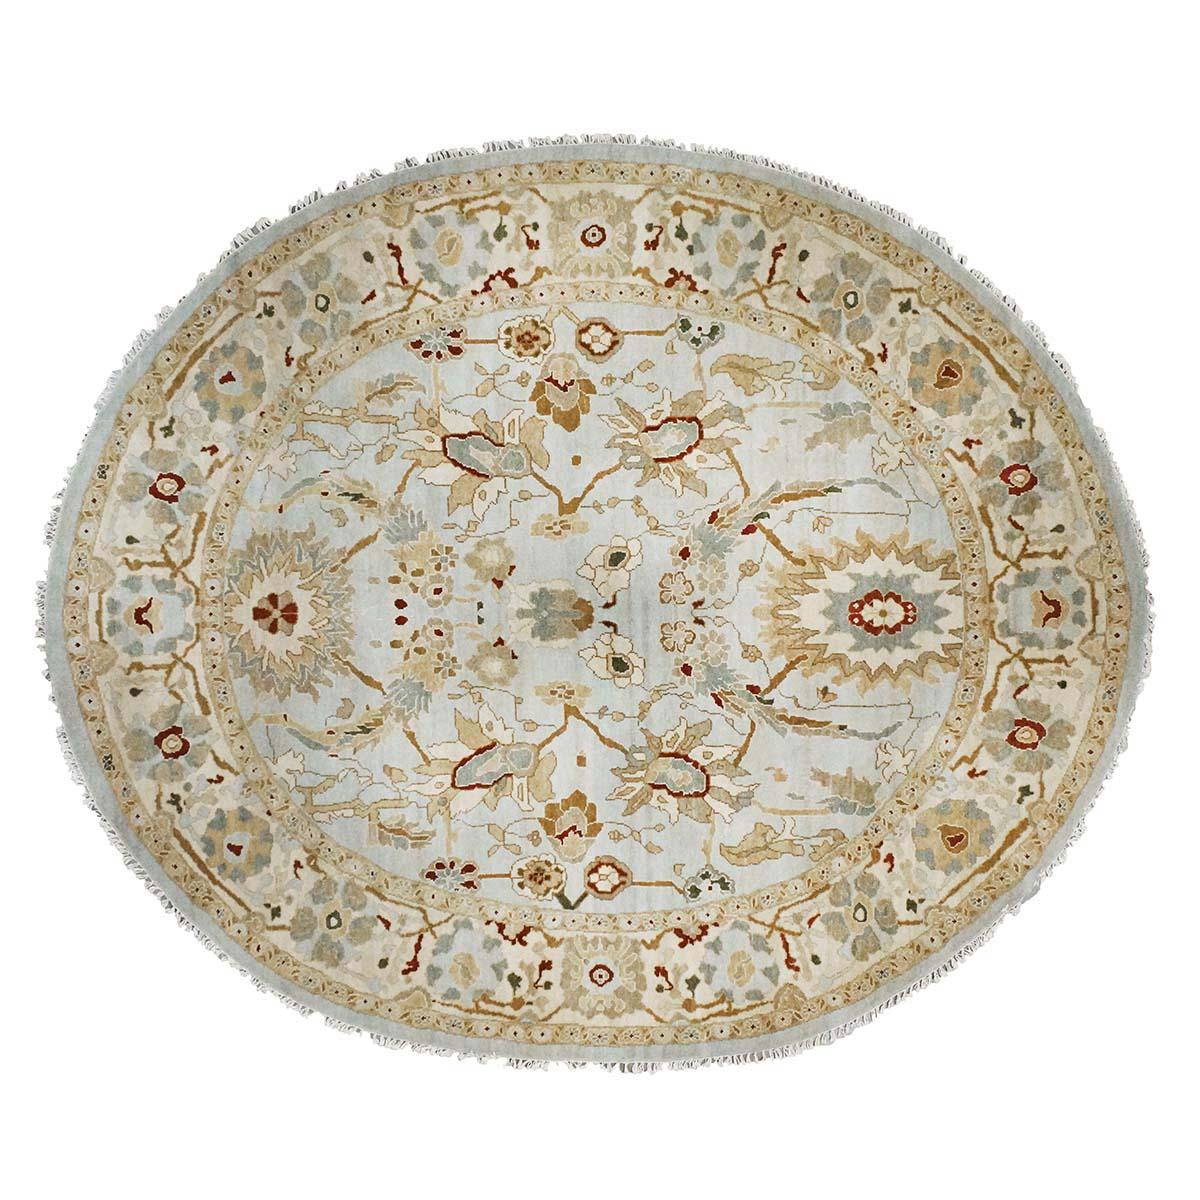 Ashly Fine Rugs presents an OVAL antique recreation of an original Persian Sultanabad Handmade Area Rug. Part of our own limited production, this antique recreation was thought of and created in-house and 100% handmade in Afghanistan by master